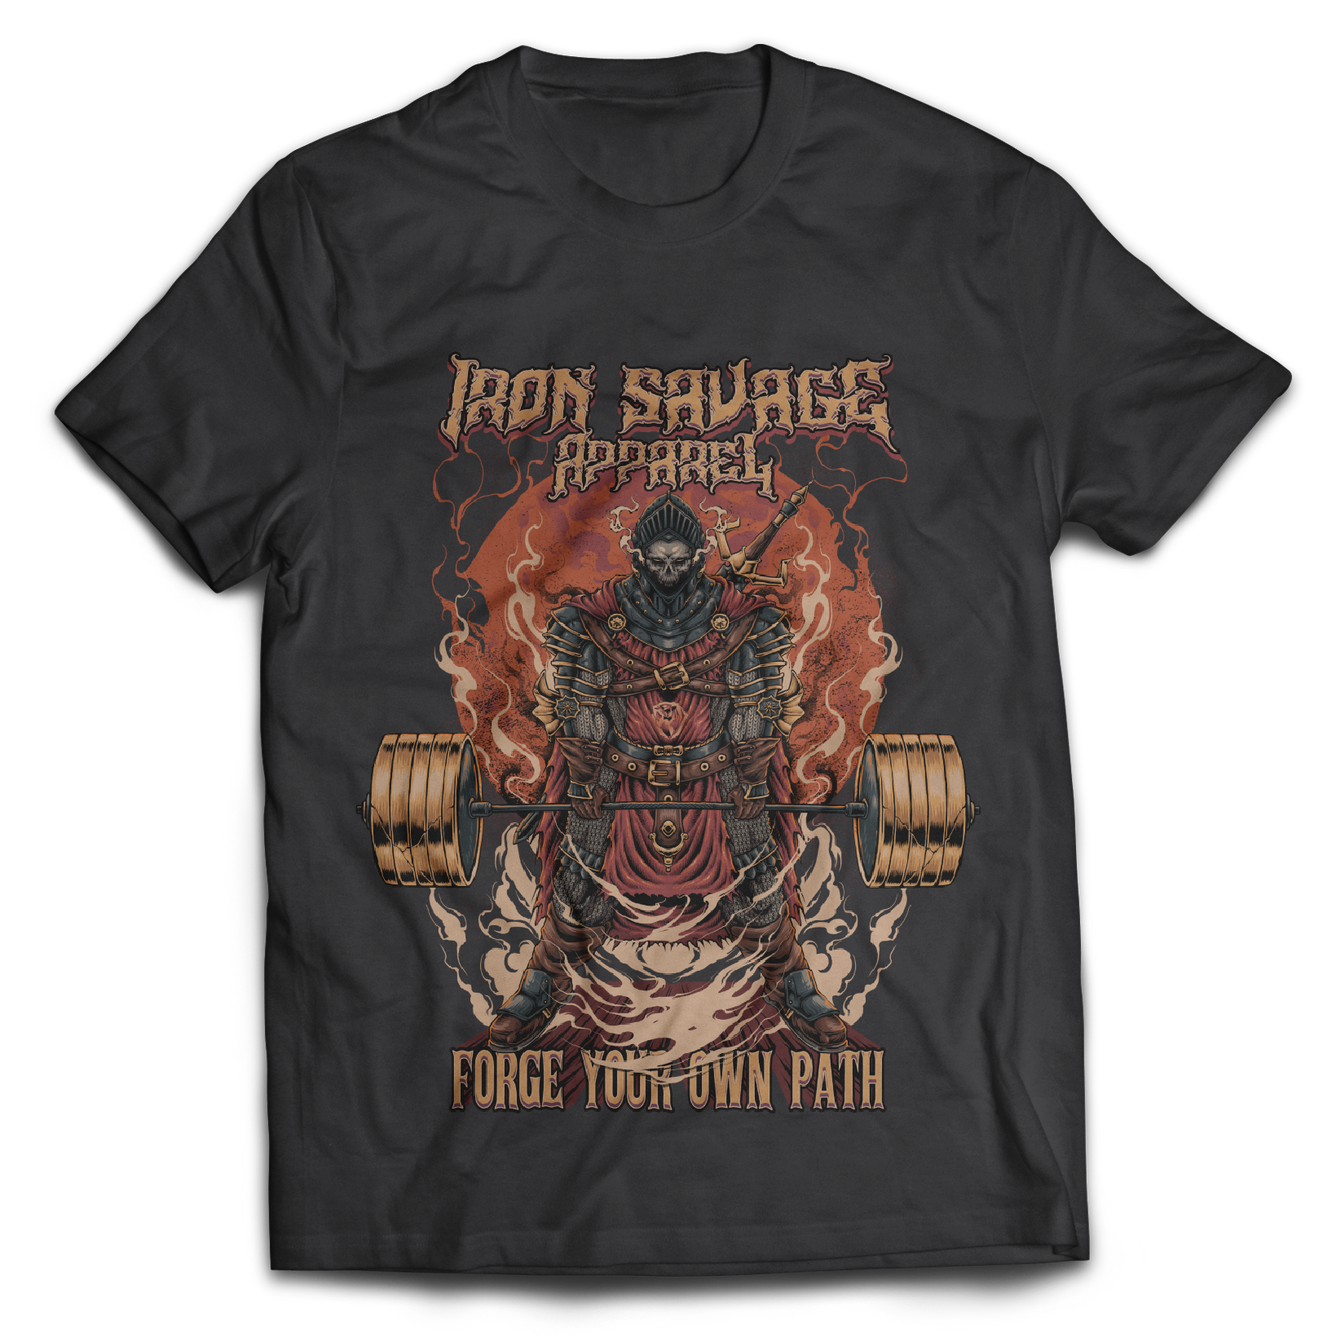 Knight: Forge your own path T-Shirt (Sumo deadlift version)